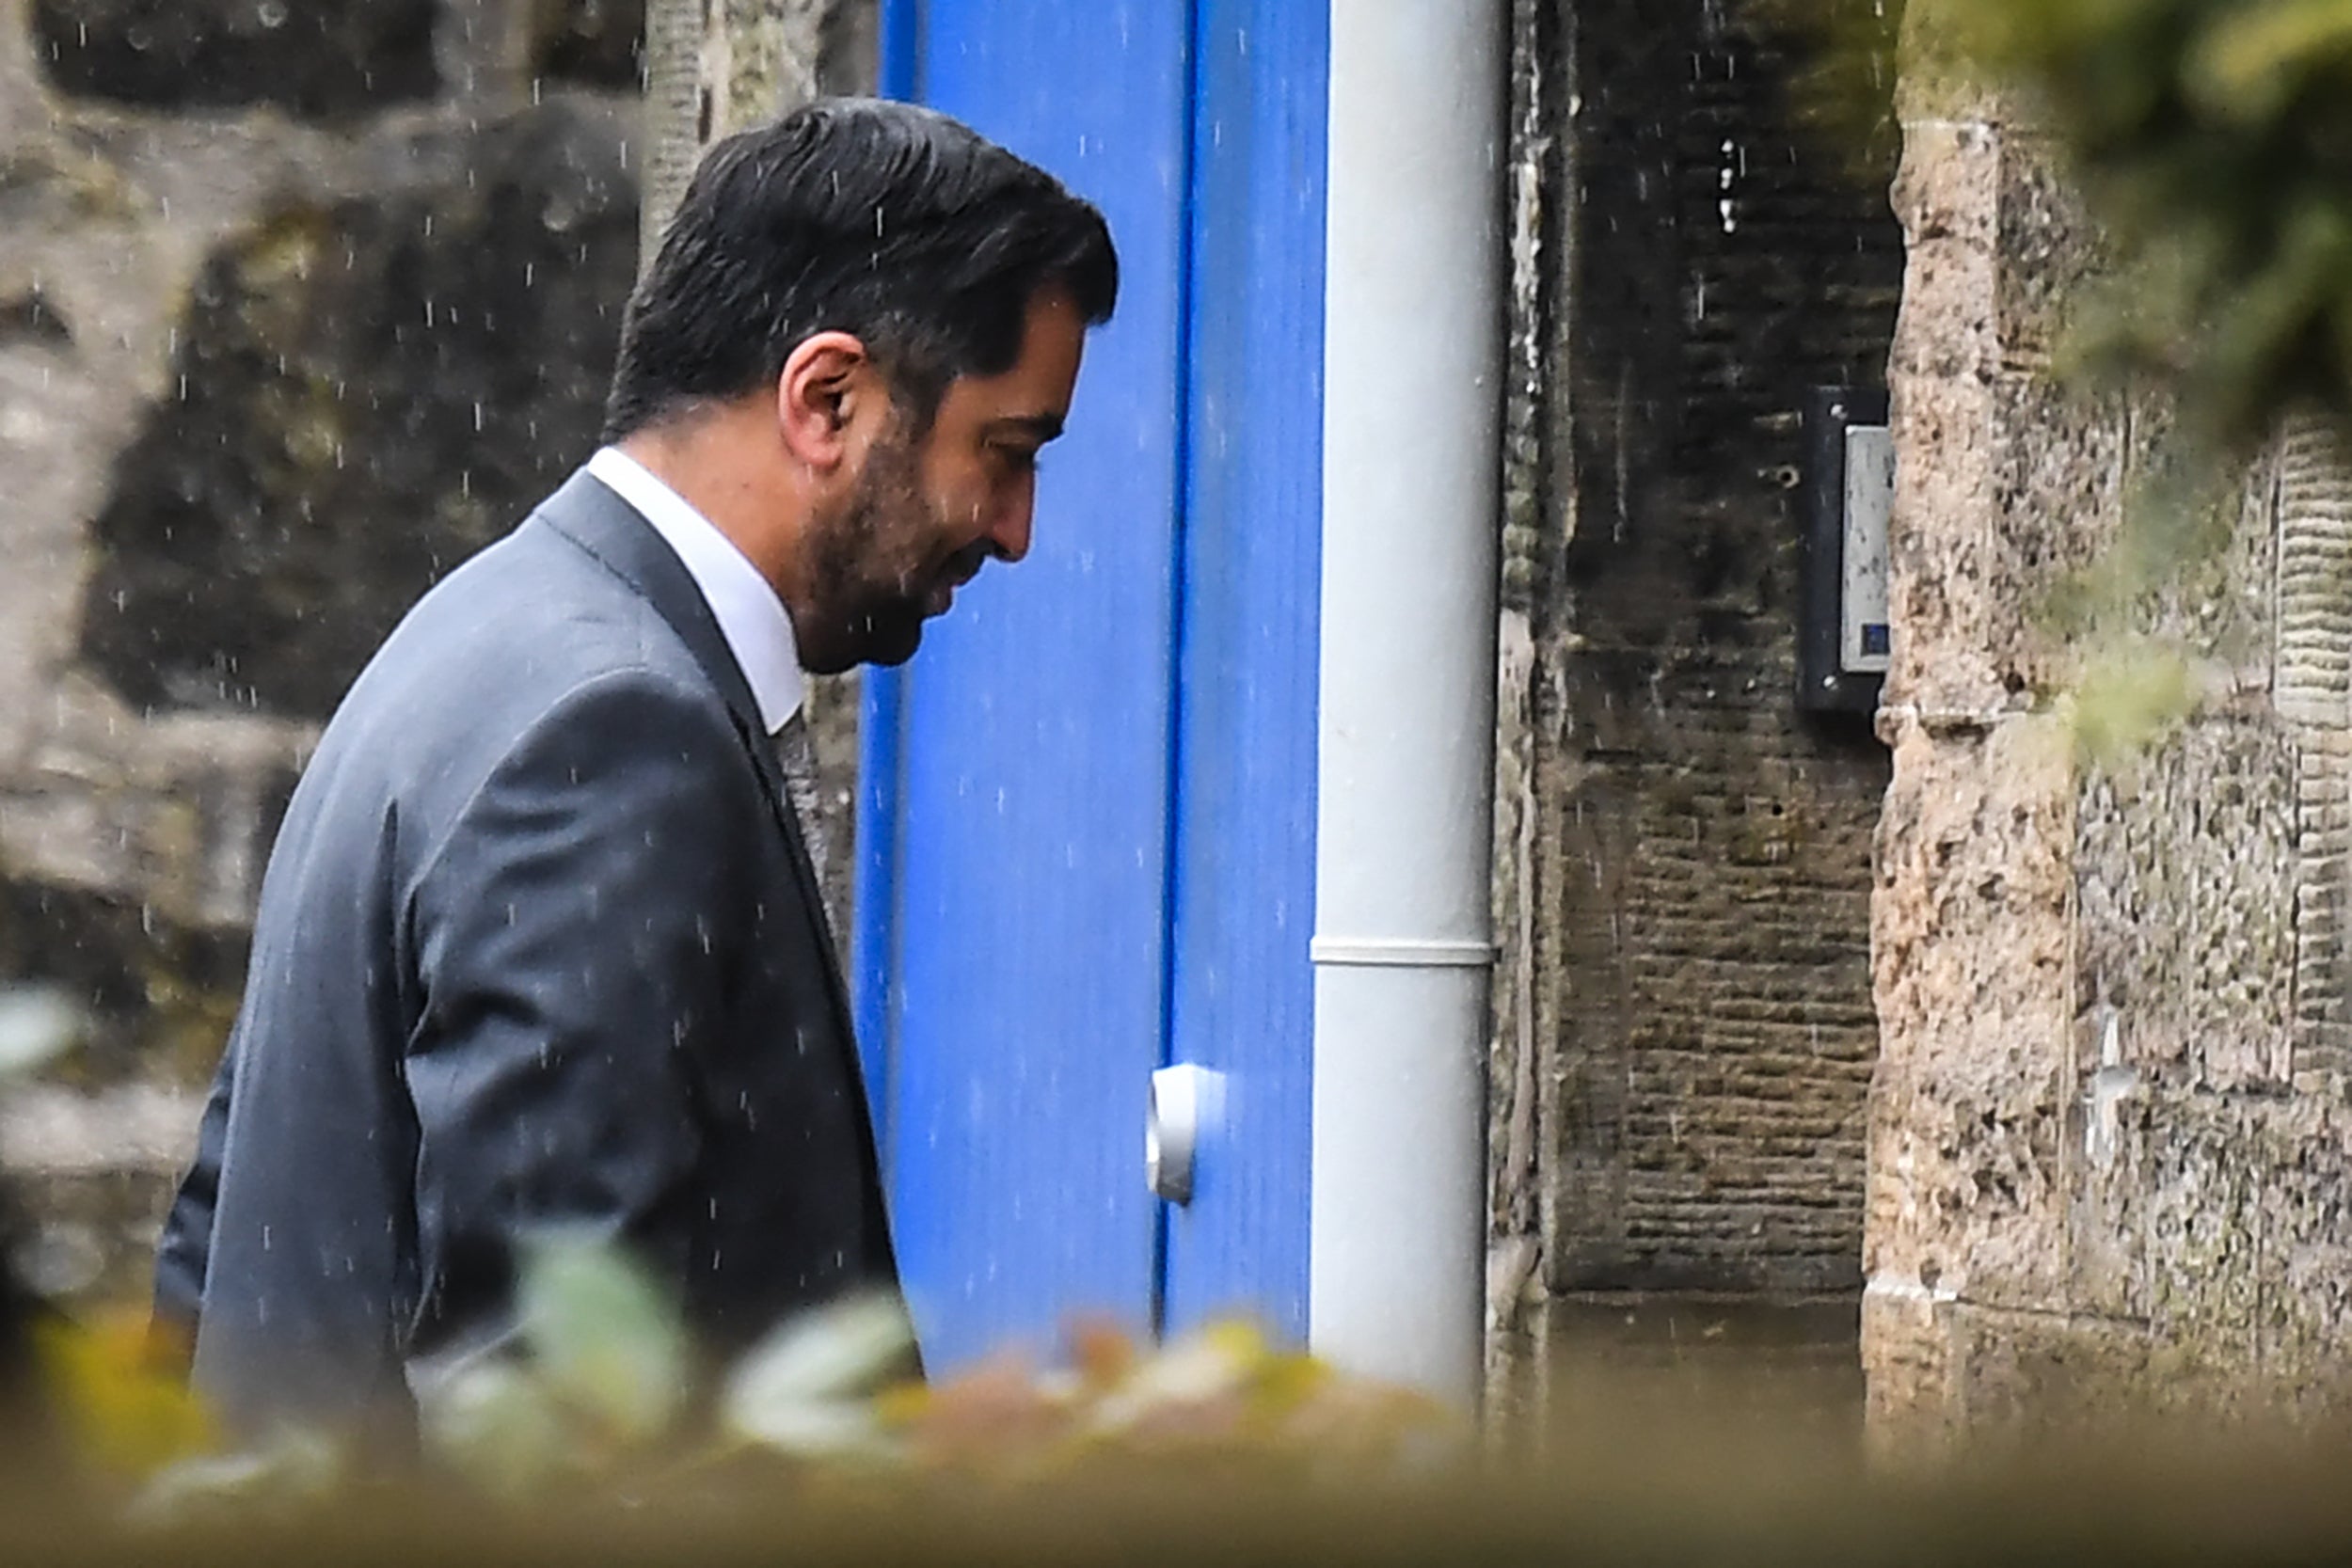 Humza Yousaf arriving at Bute House ahead of his announcement on Monday